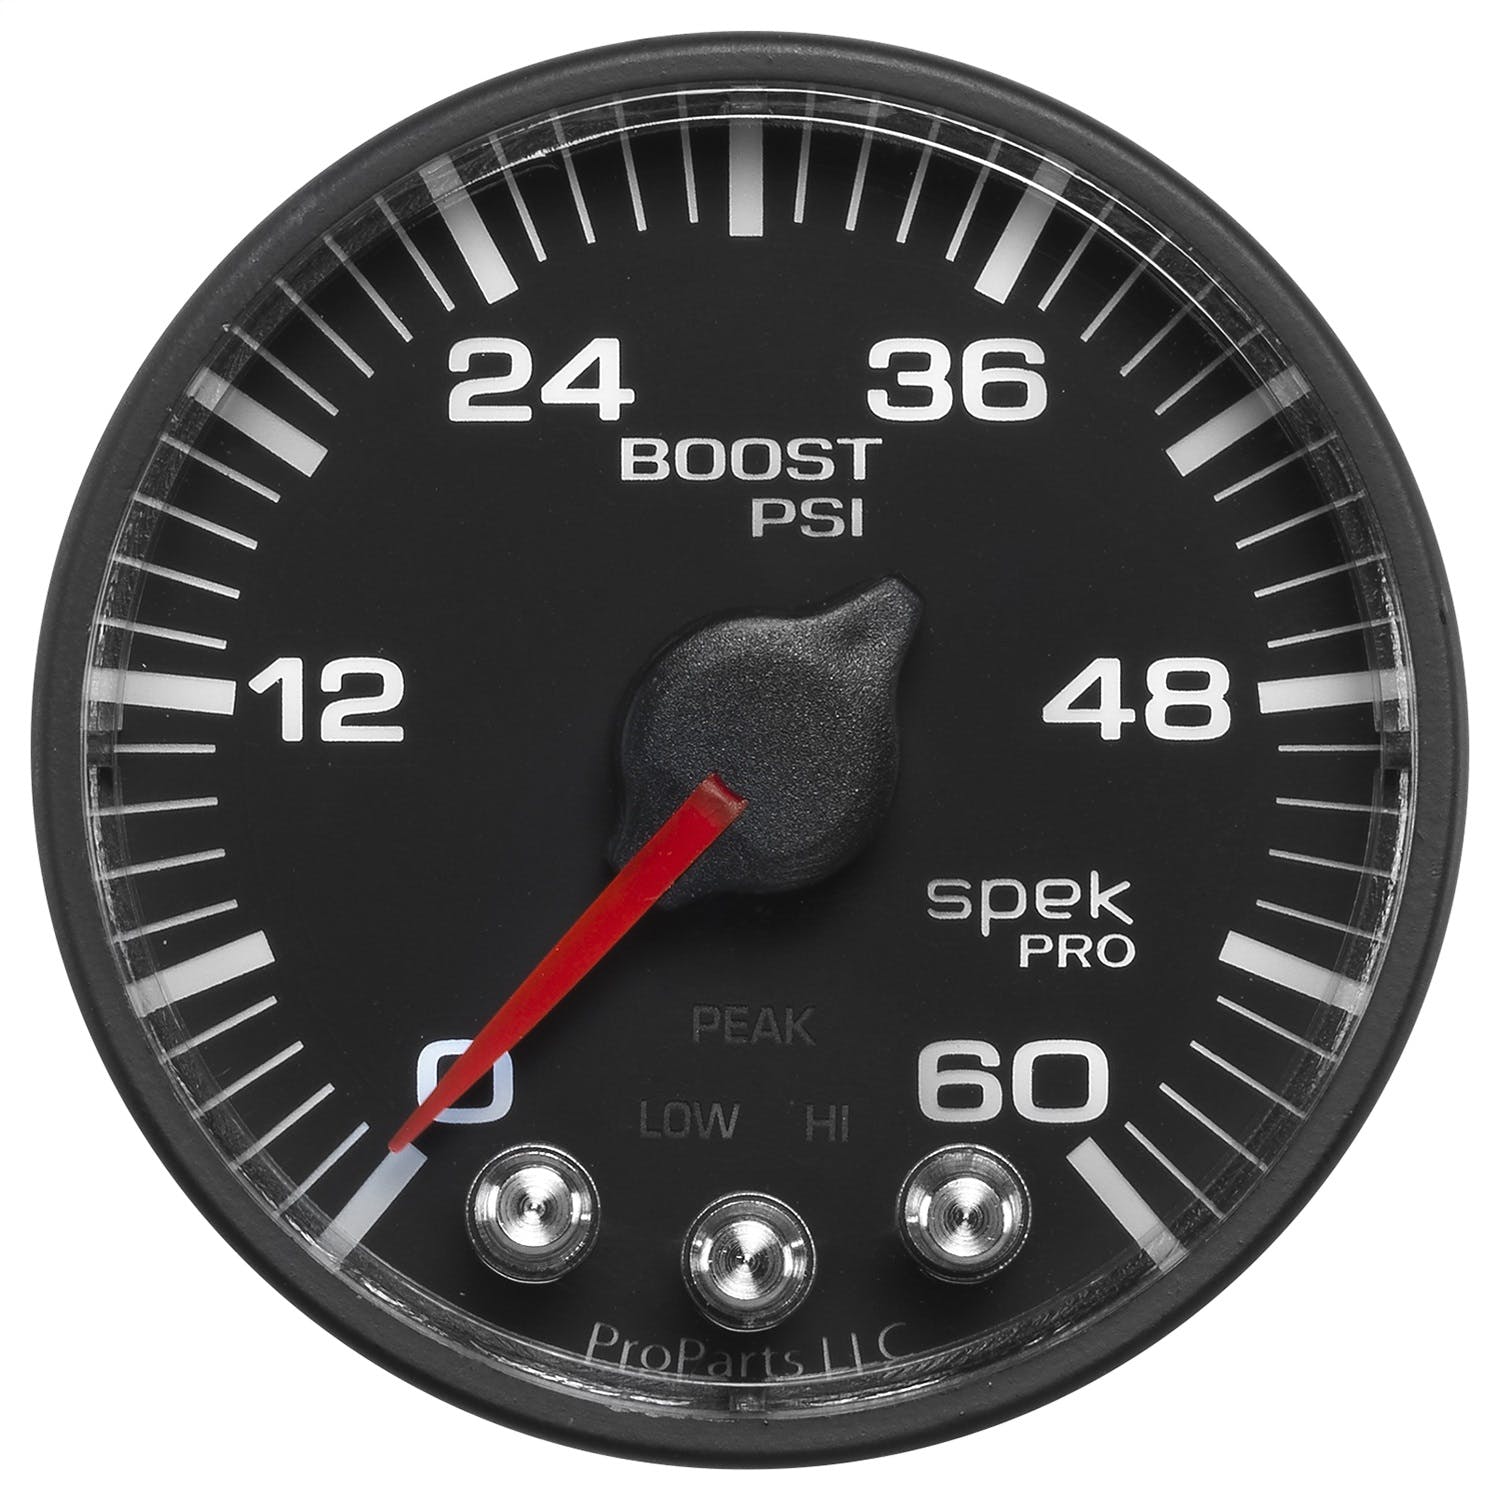 AutoMeter Products P304328 Spek Pro 2-1/16in Boost, 0-60 PSI, Black Dial, Black Bezel